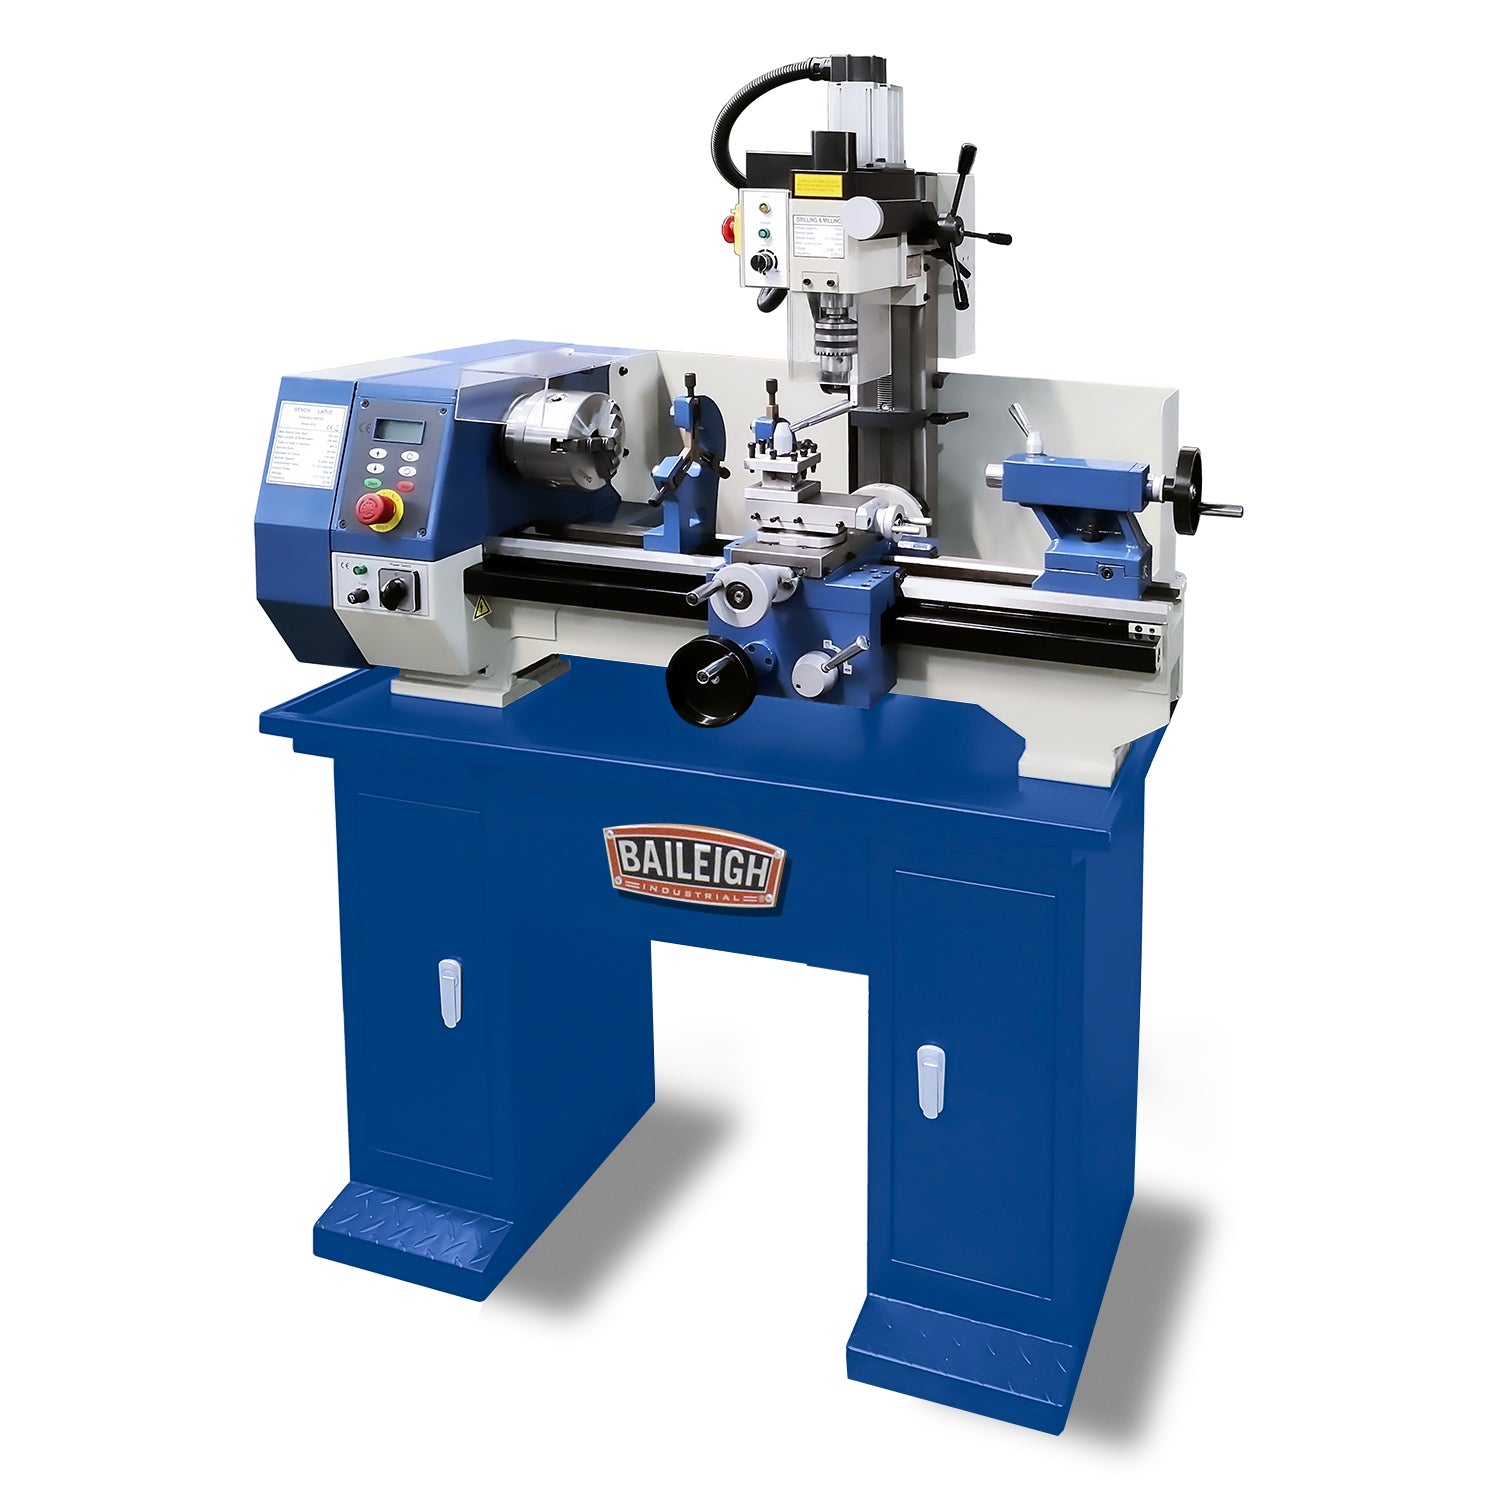 Baileigh MLD-1022 110V Mill Lathe and Drill Combination, 10" Swing 22" between Centers